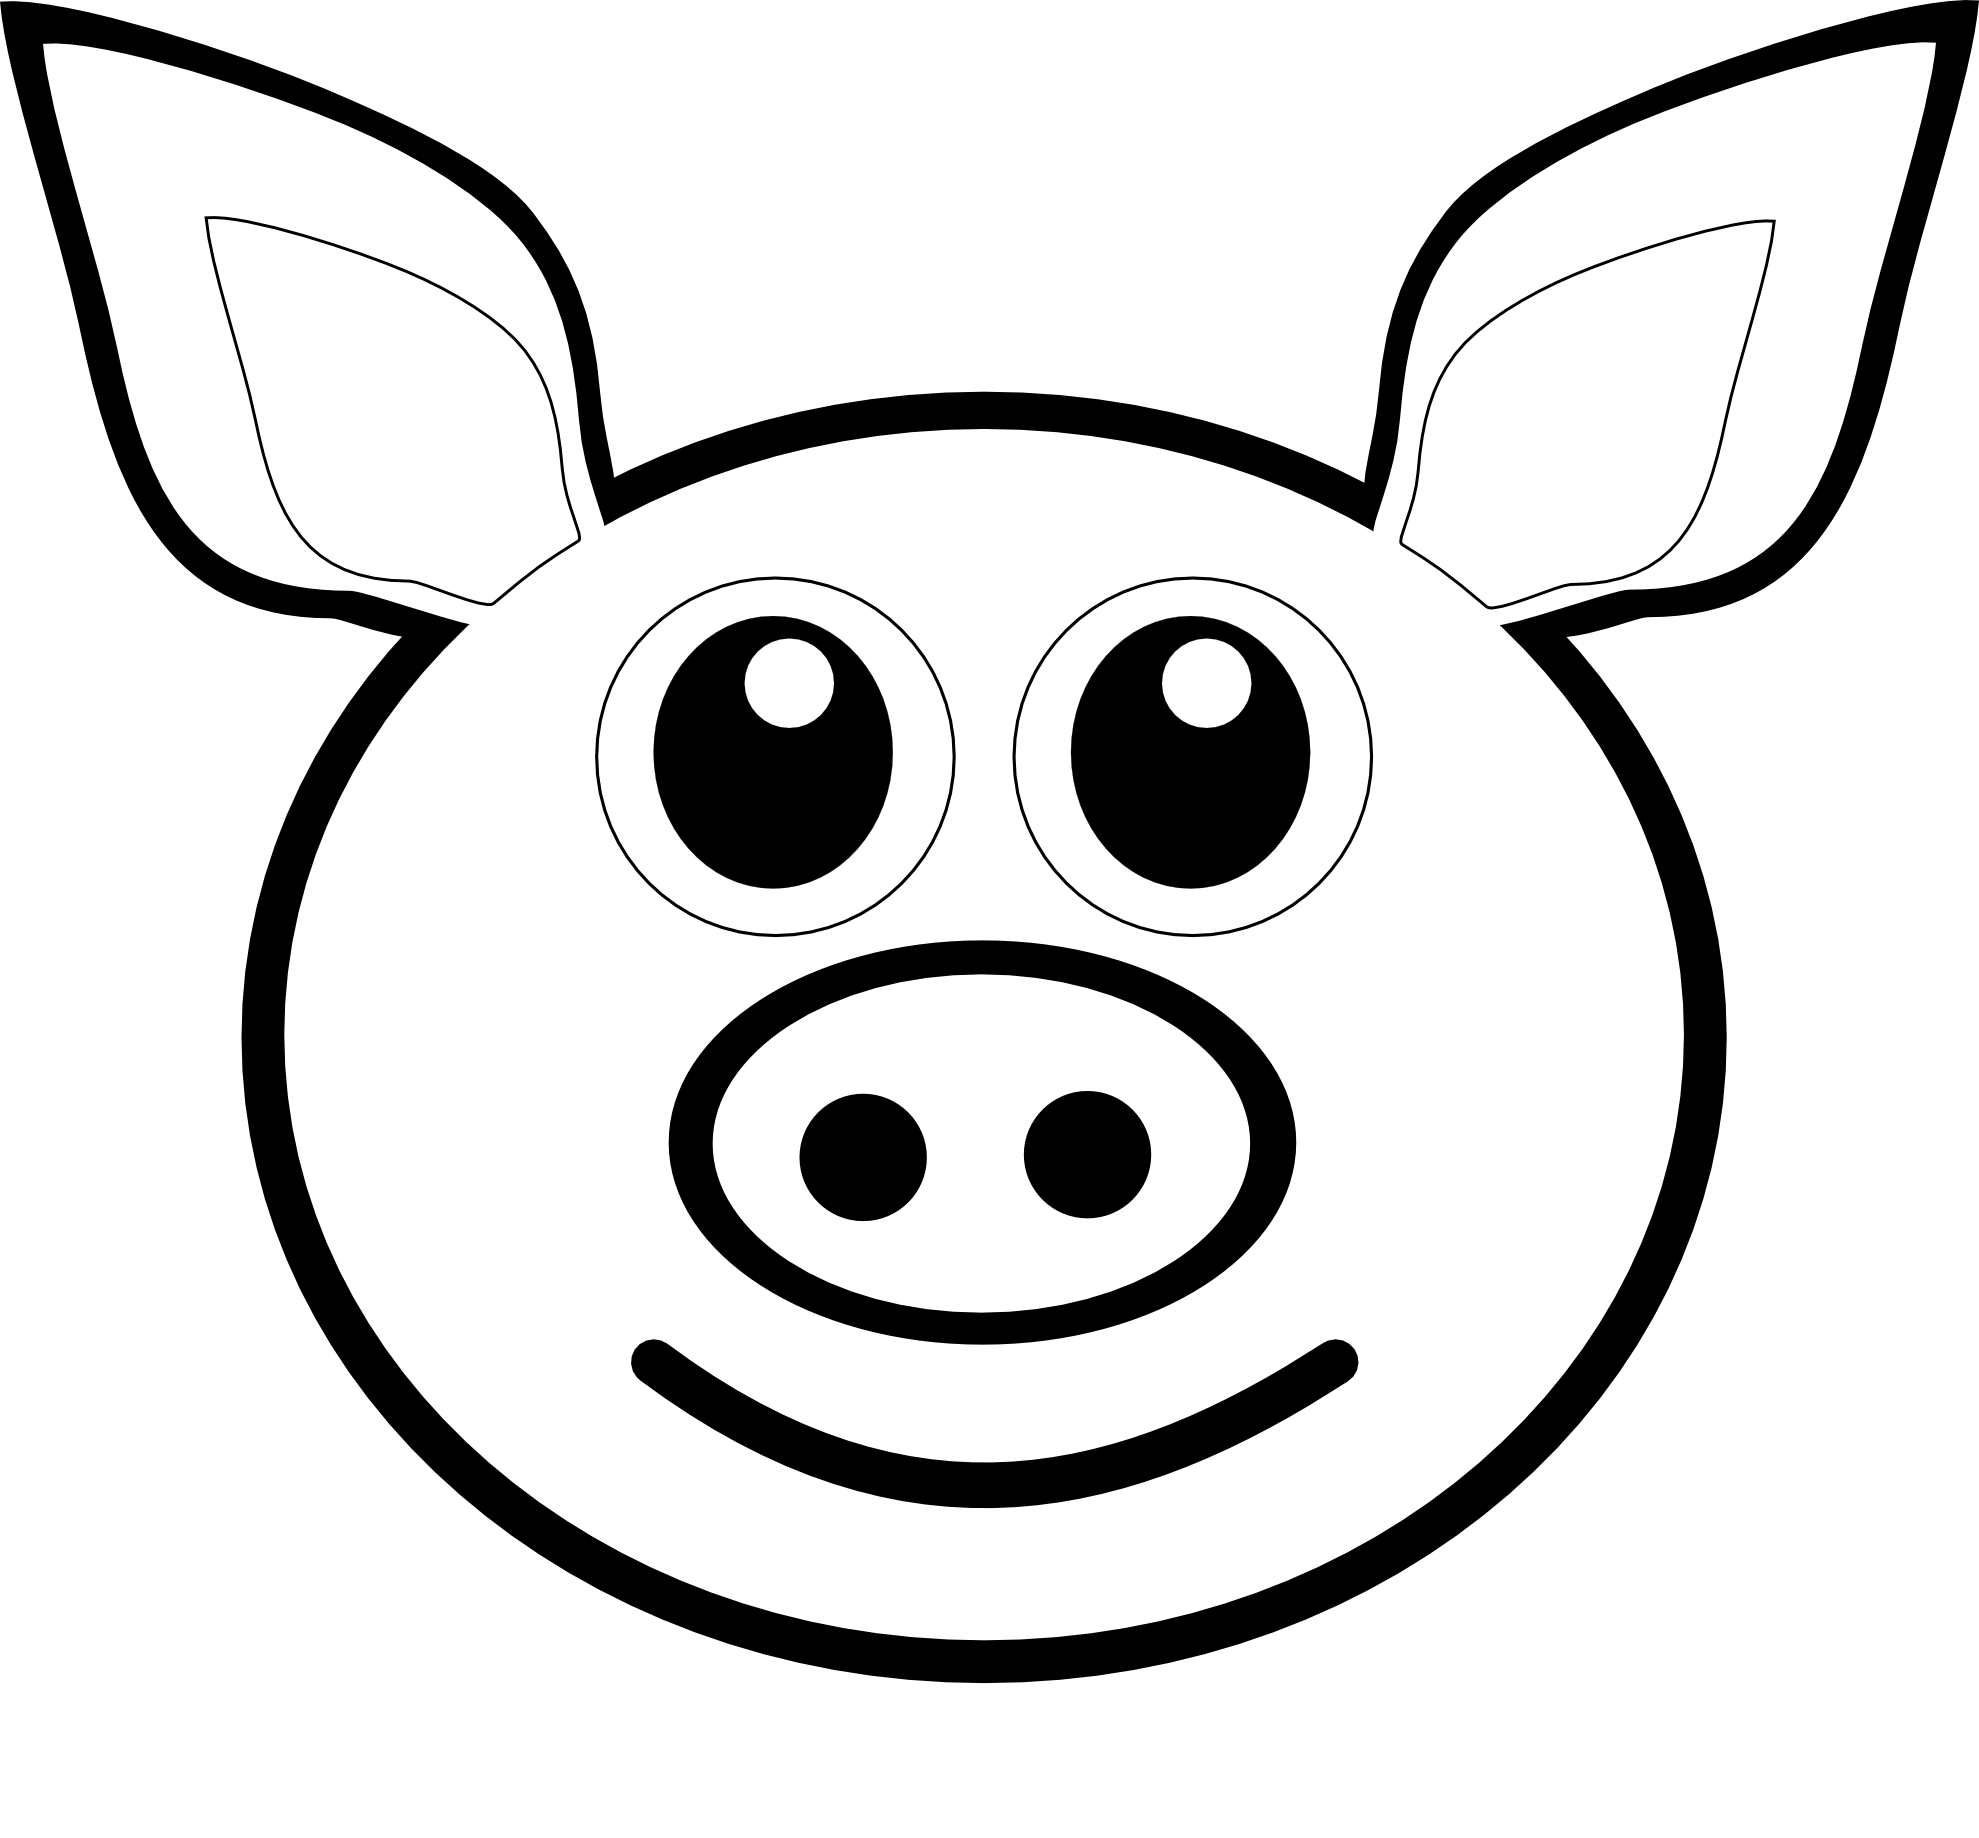 How To Draw A Cartoon Pig Face - Gallery